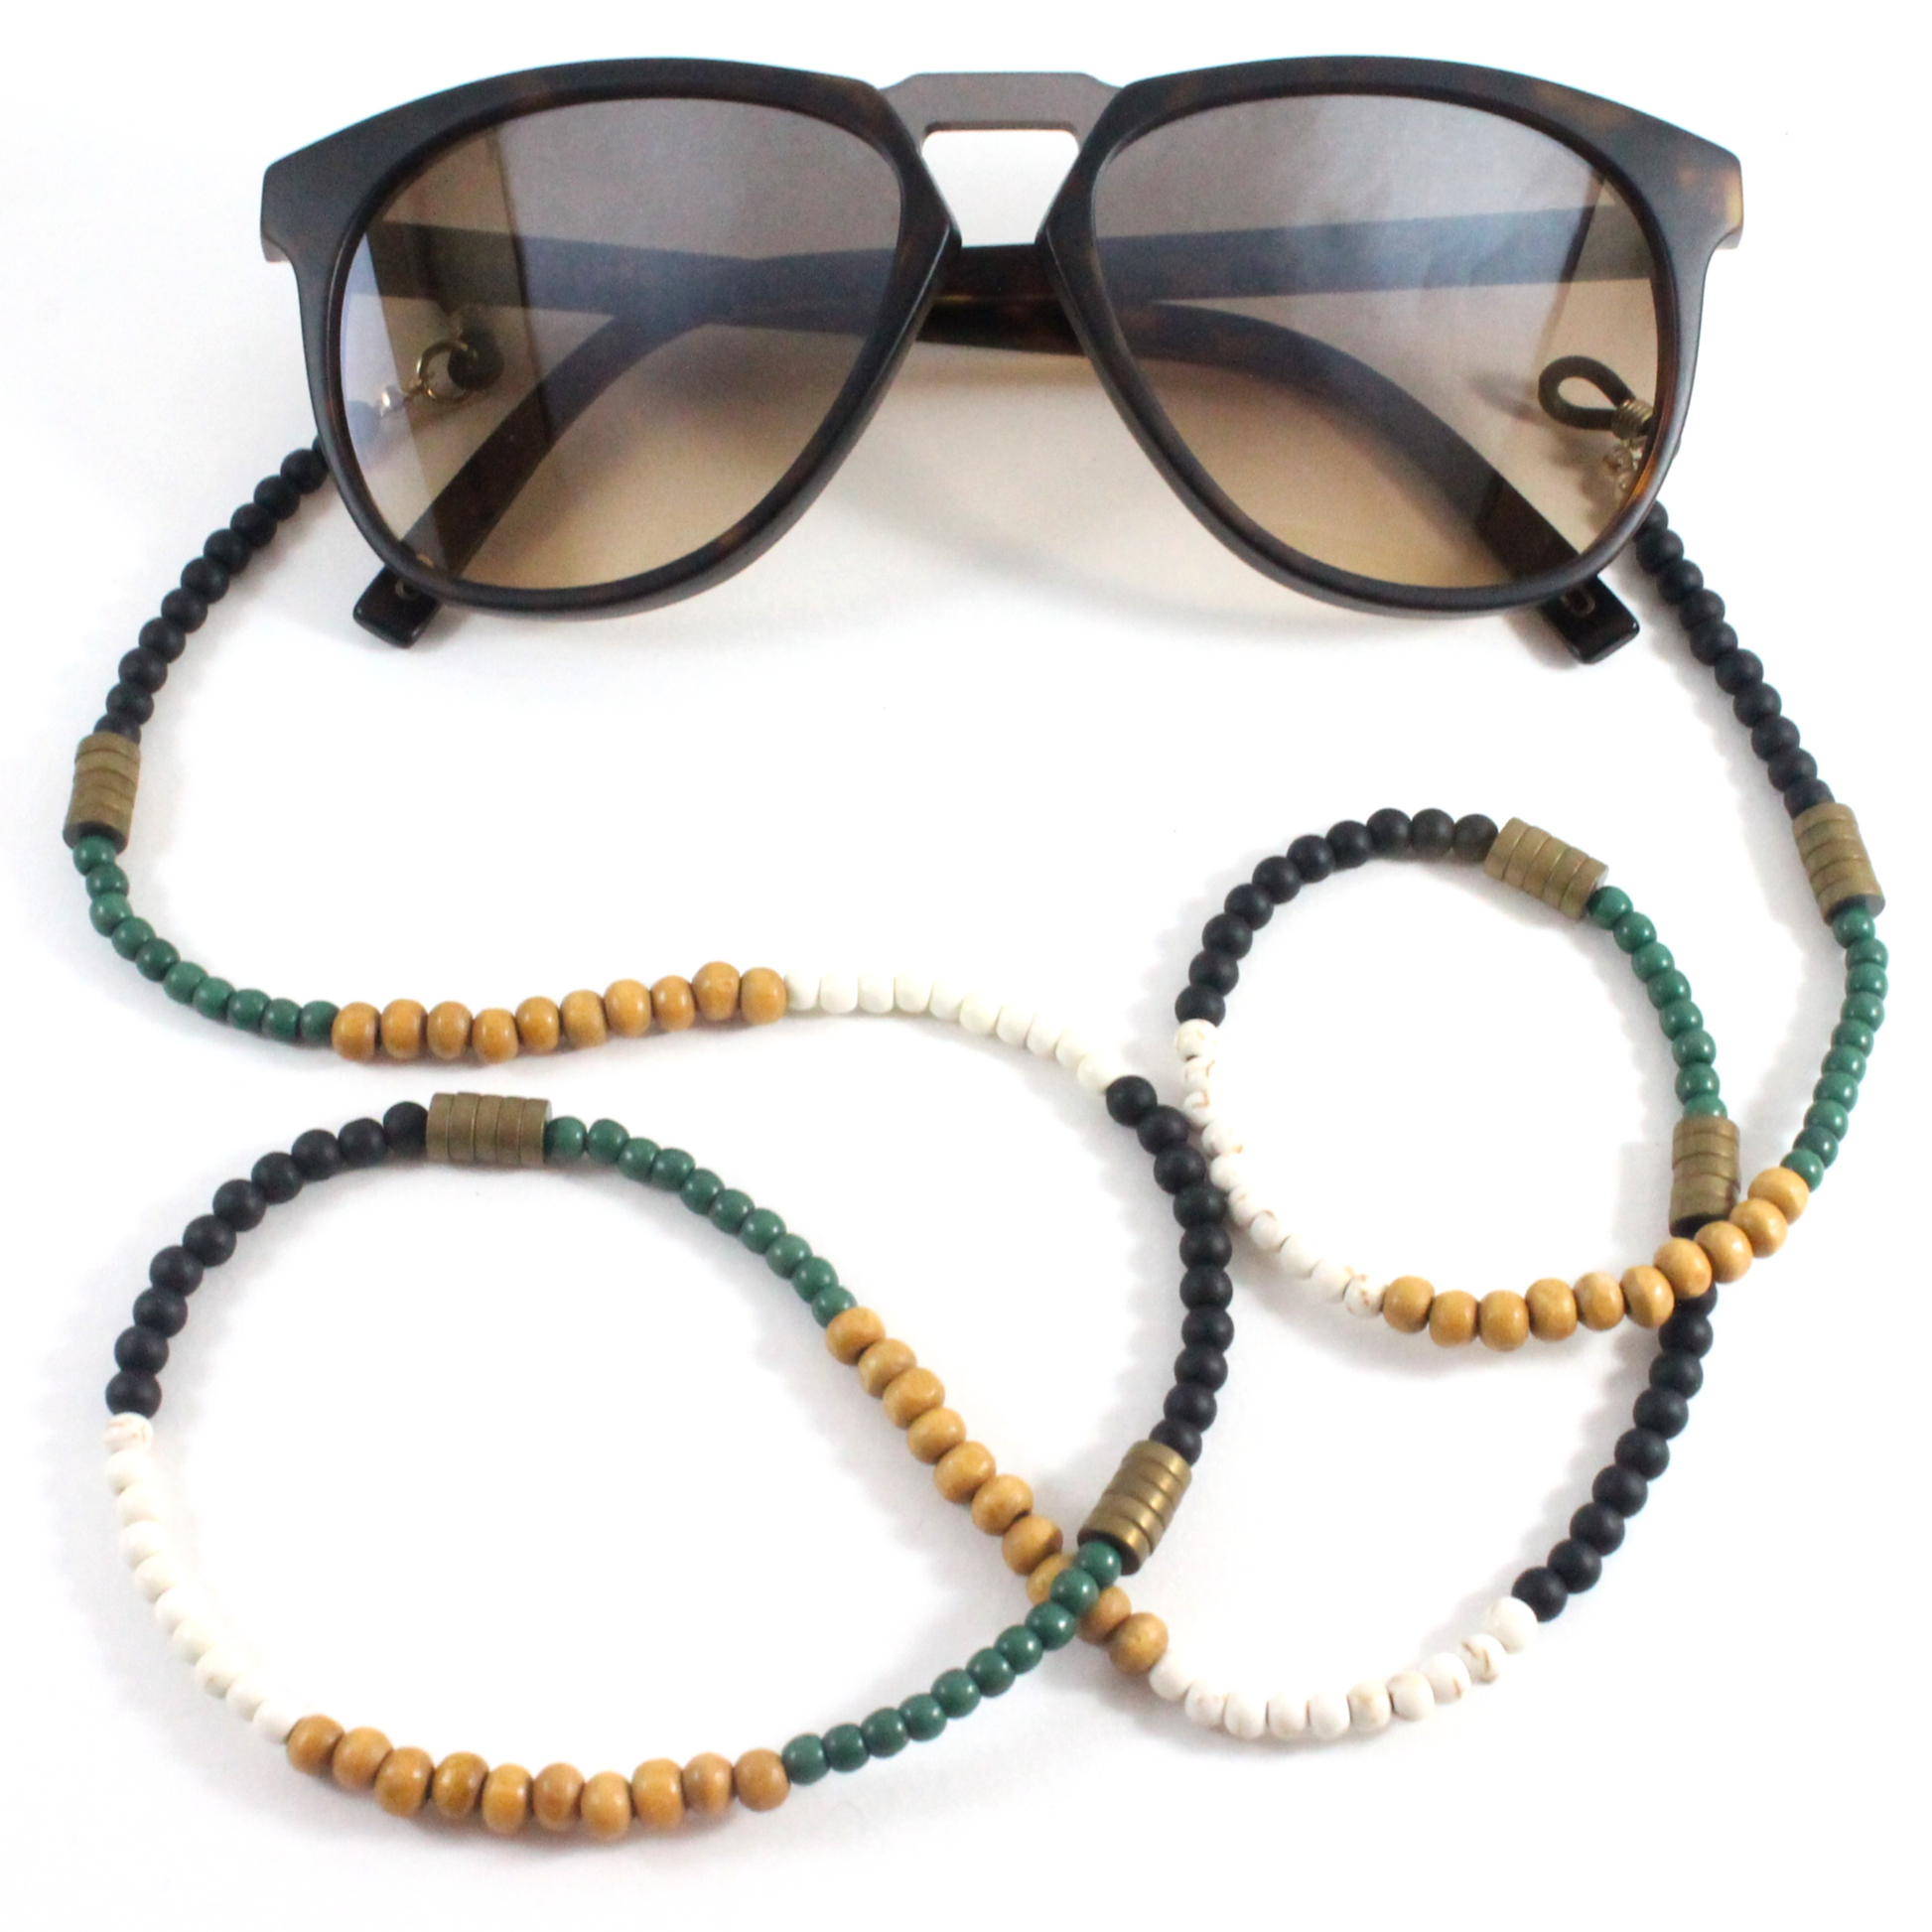 Onyx w/ Green Agate and Wood Beads - Men's Eyewear Chain-The Ricci District